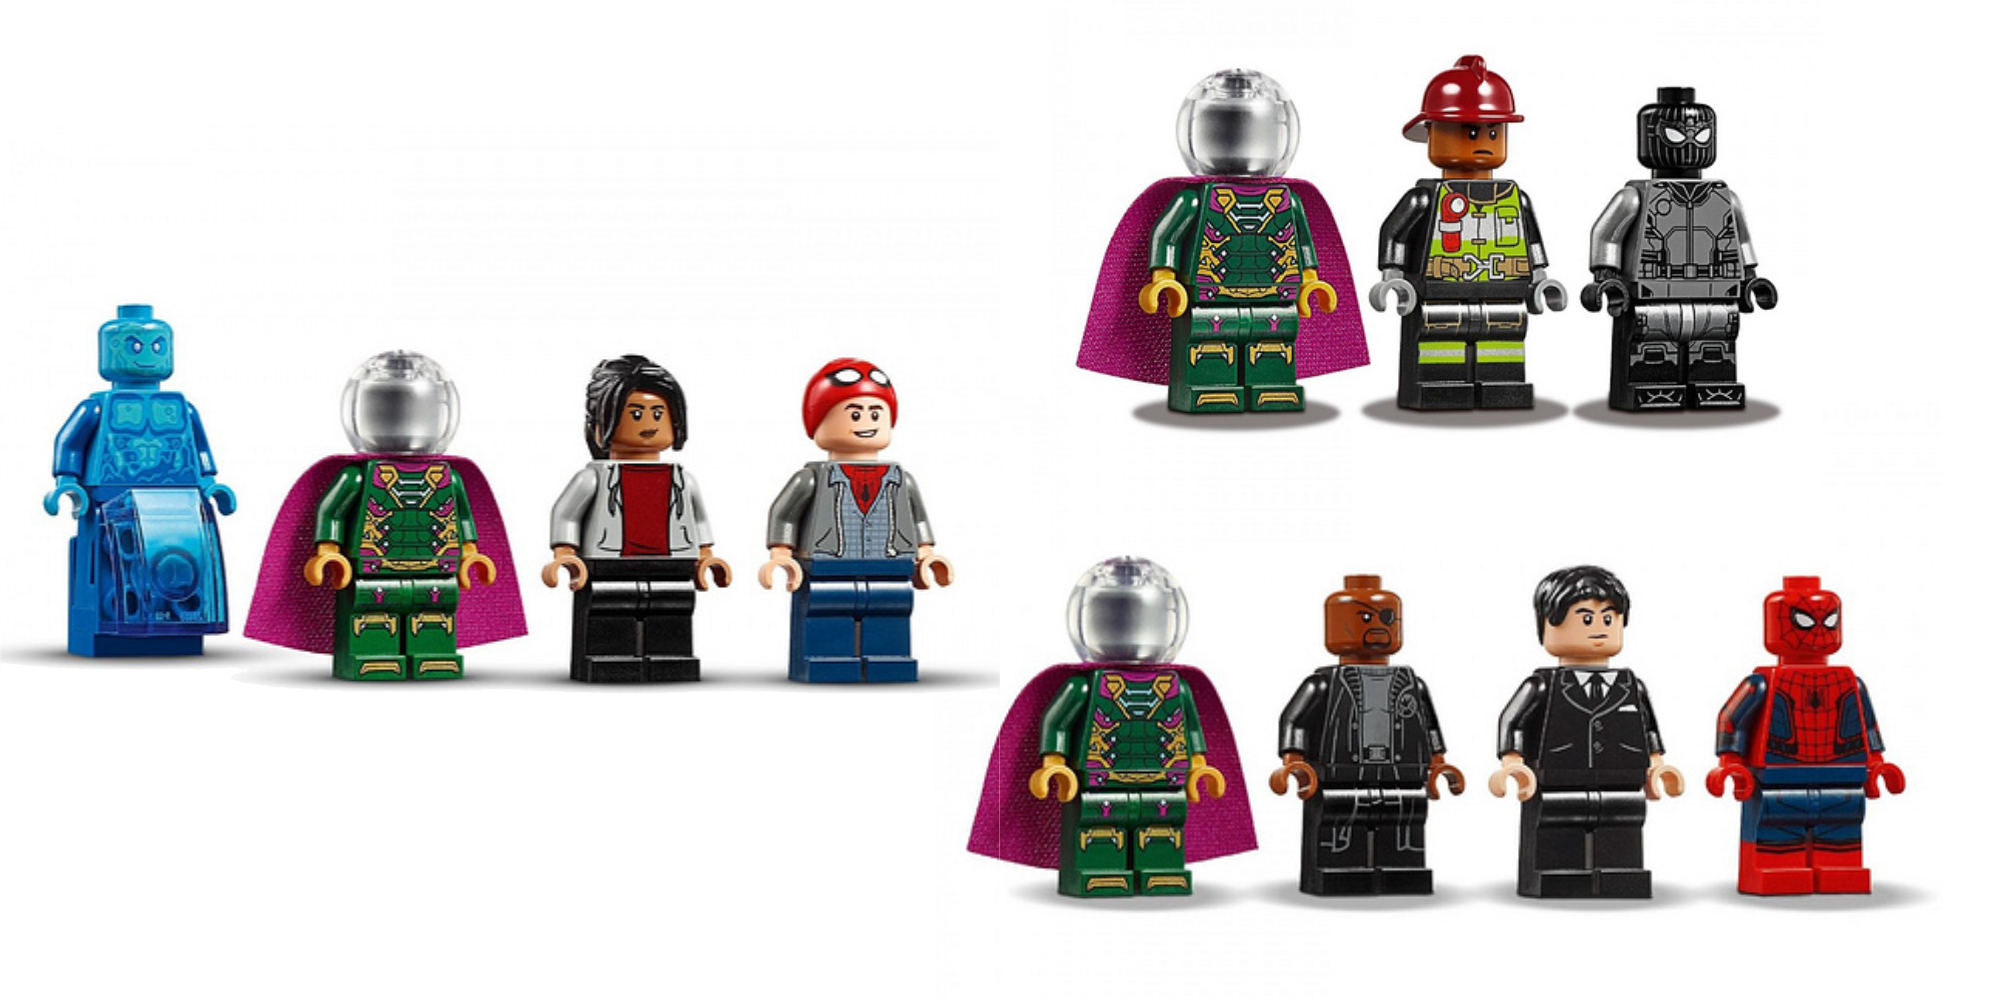 LEGO Spider-Man: Far From Home minifigures